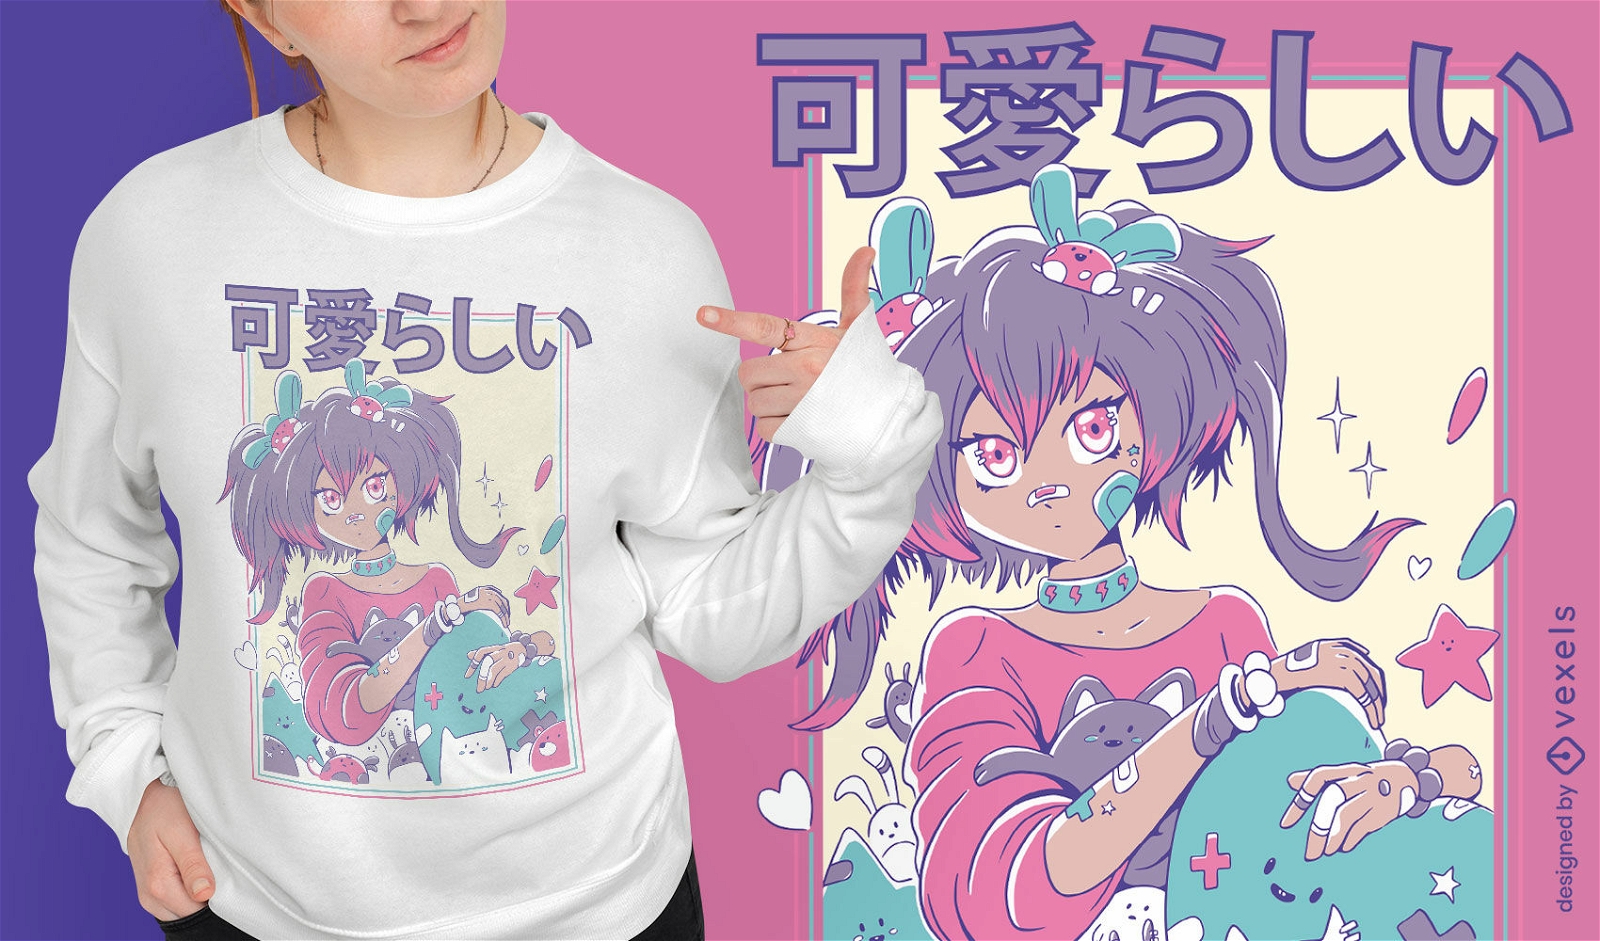 Cute anime girl with ponytails t-shirt design